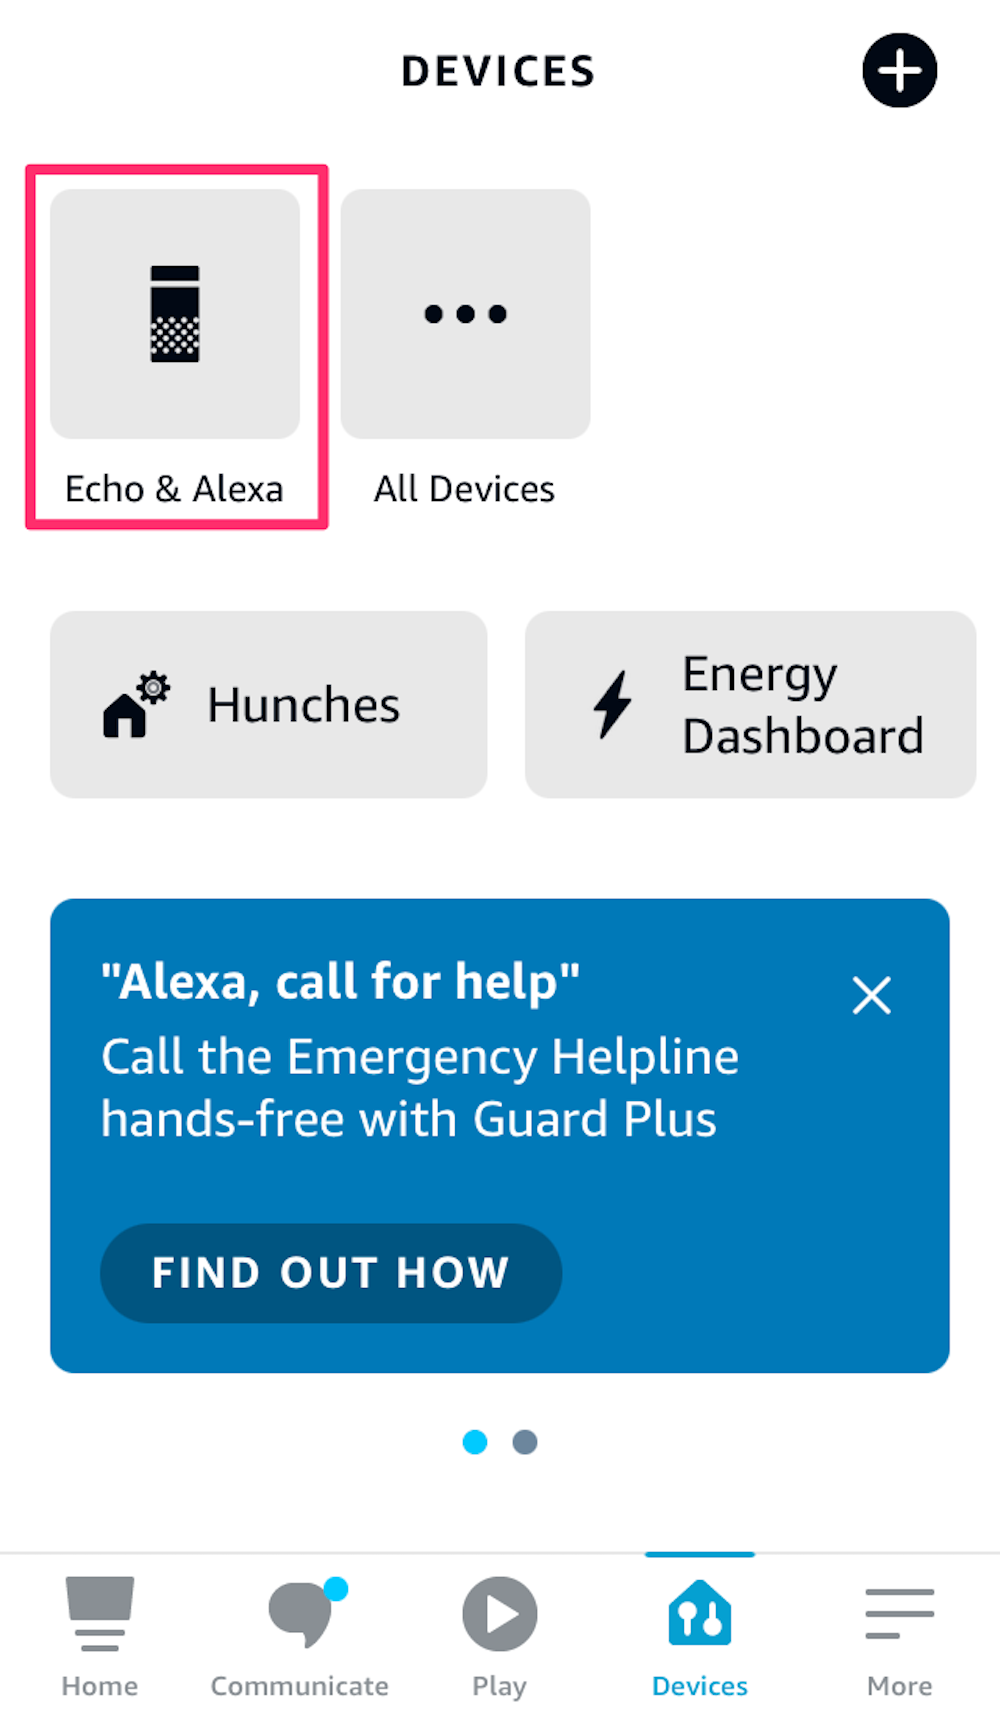 Screenshot of the Devices tab in the Alexa app